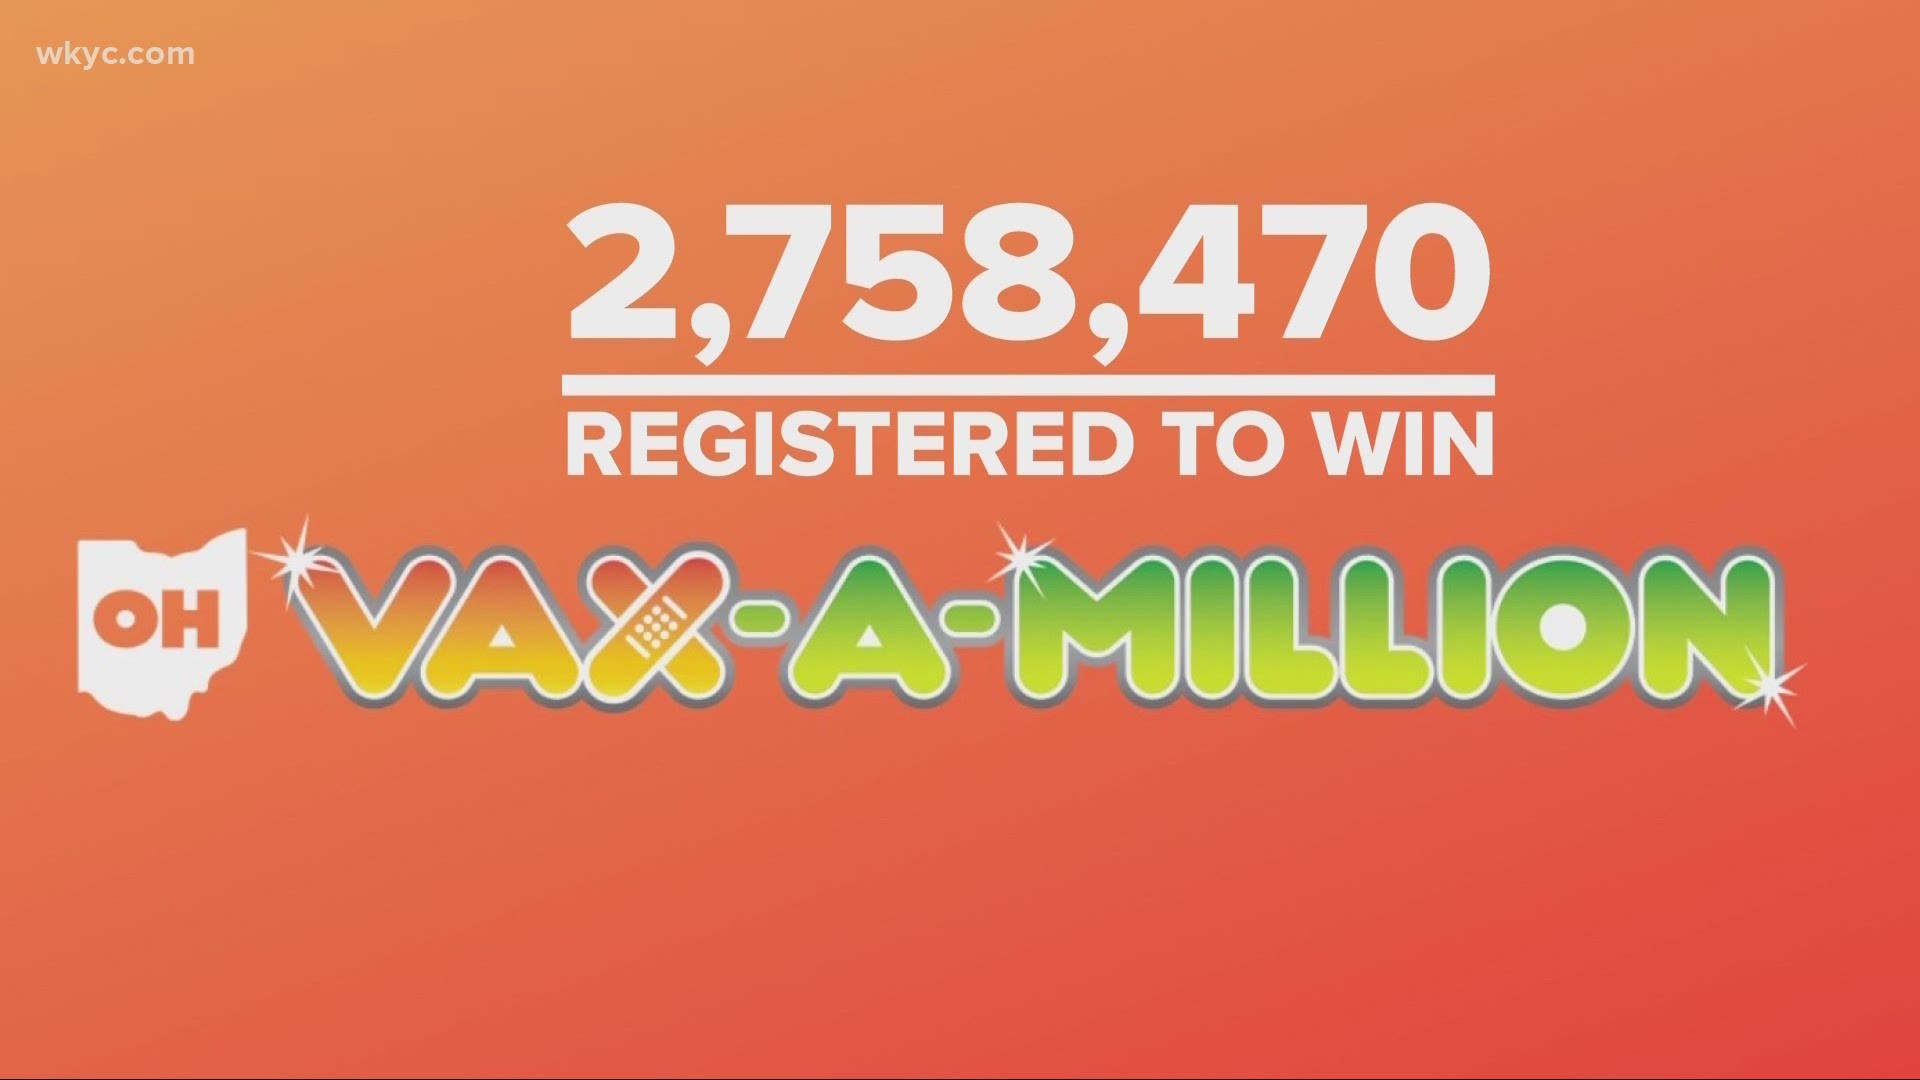 The Ohio vaccine lottery has 2.76 million people registered.  The winner of this week's drawing will be announced on Wednesday, May 26 at 7:29 p.m.